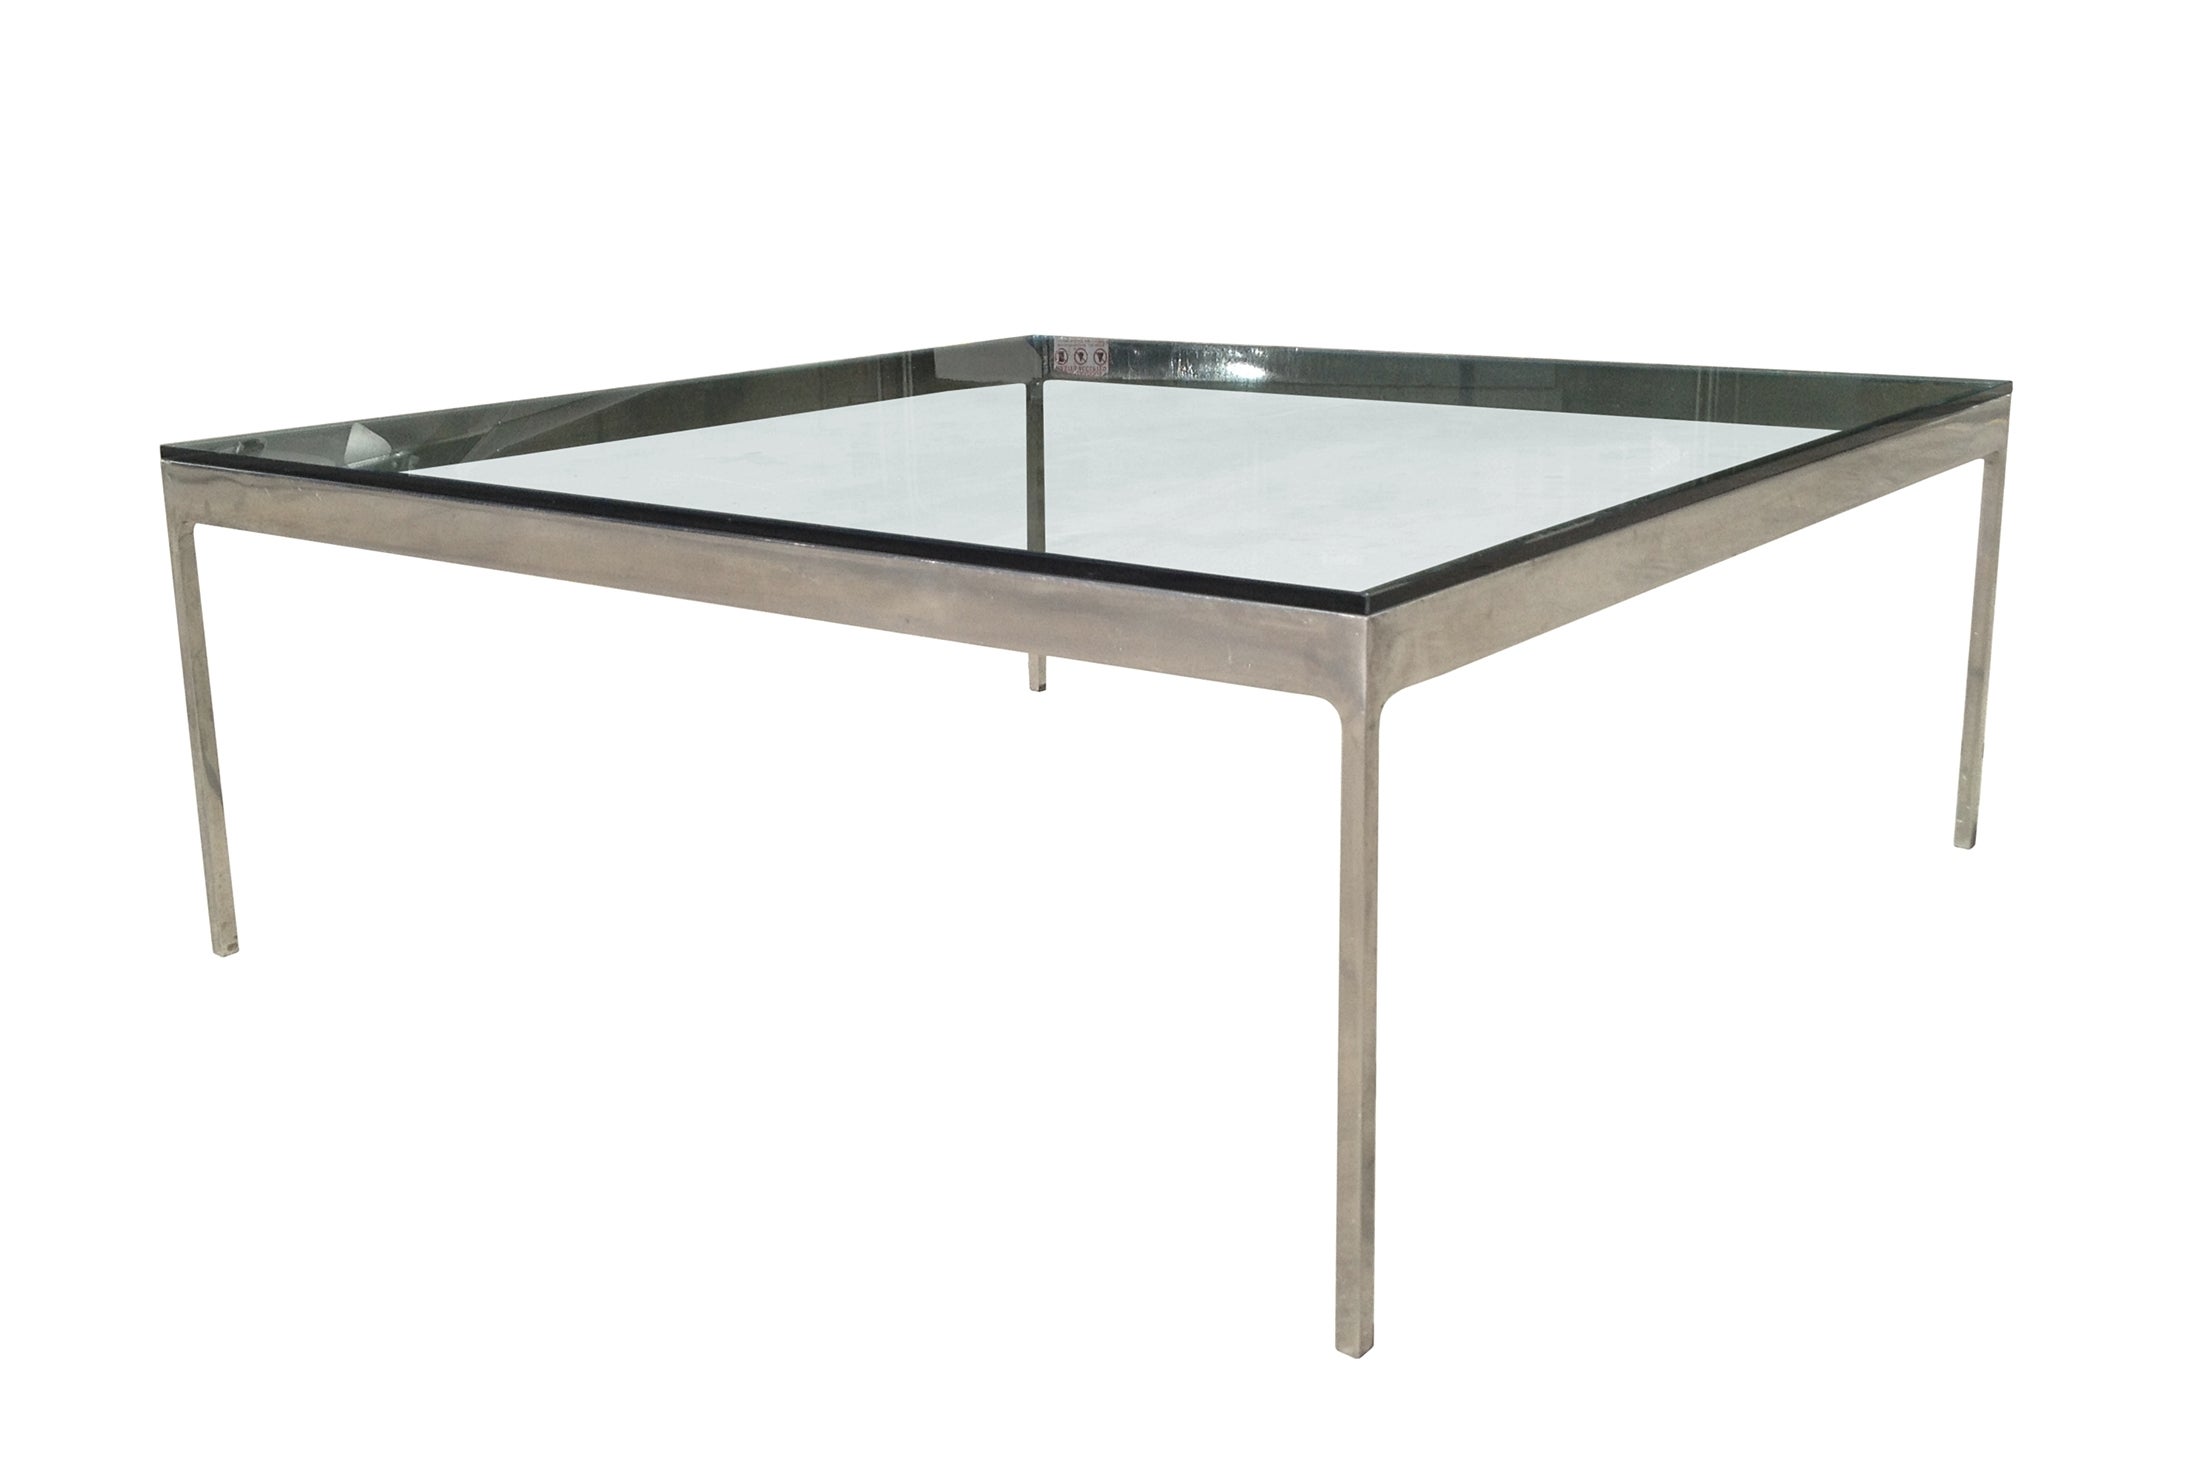 Low Coffee Table in Polished Nickel and Glass Top by Nicos Zographos